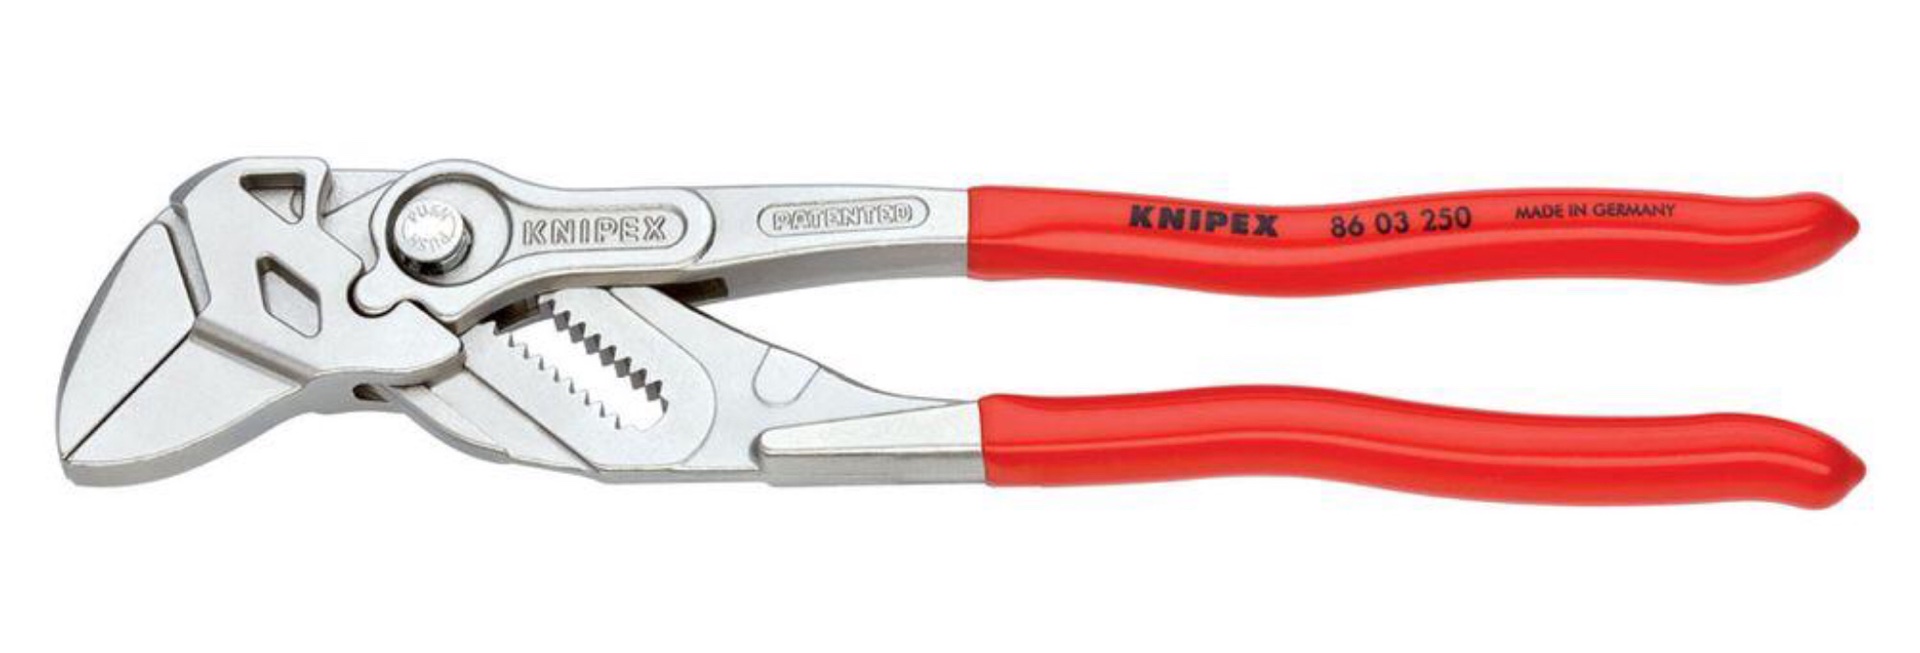 Knipex 10" pliers wrench. ($54)